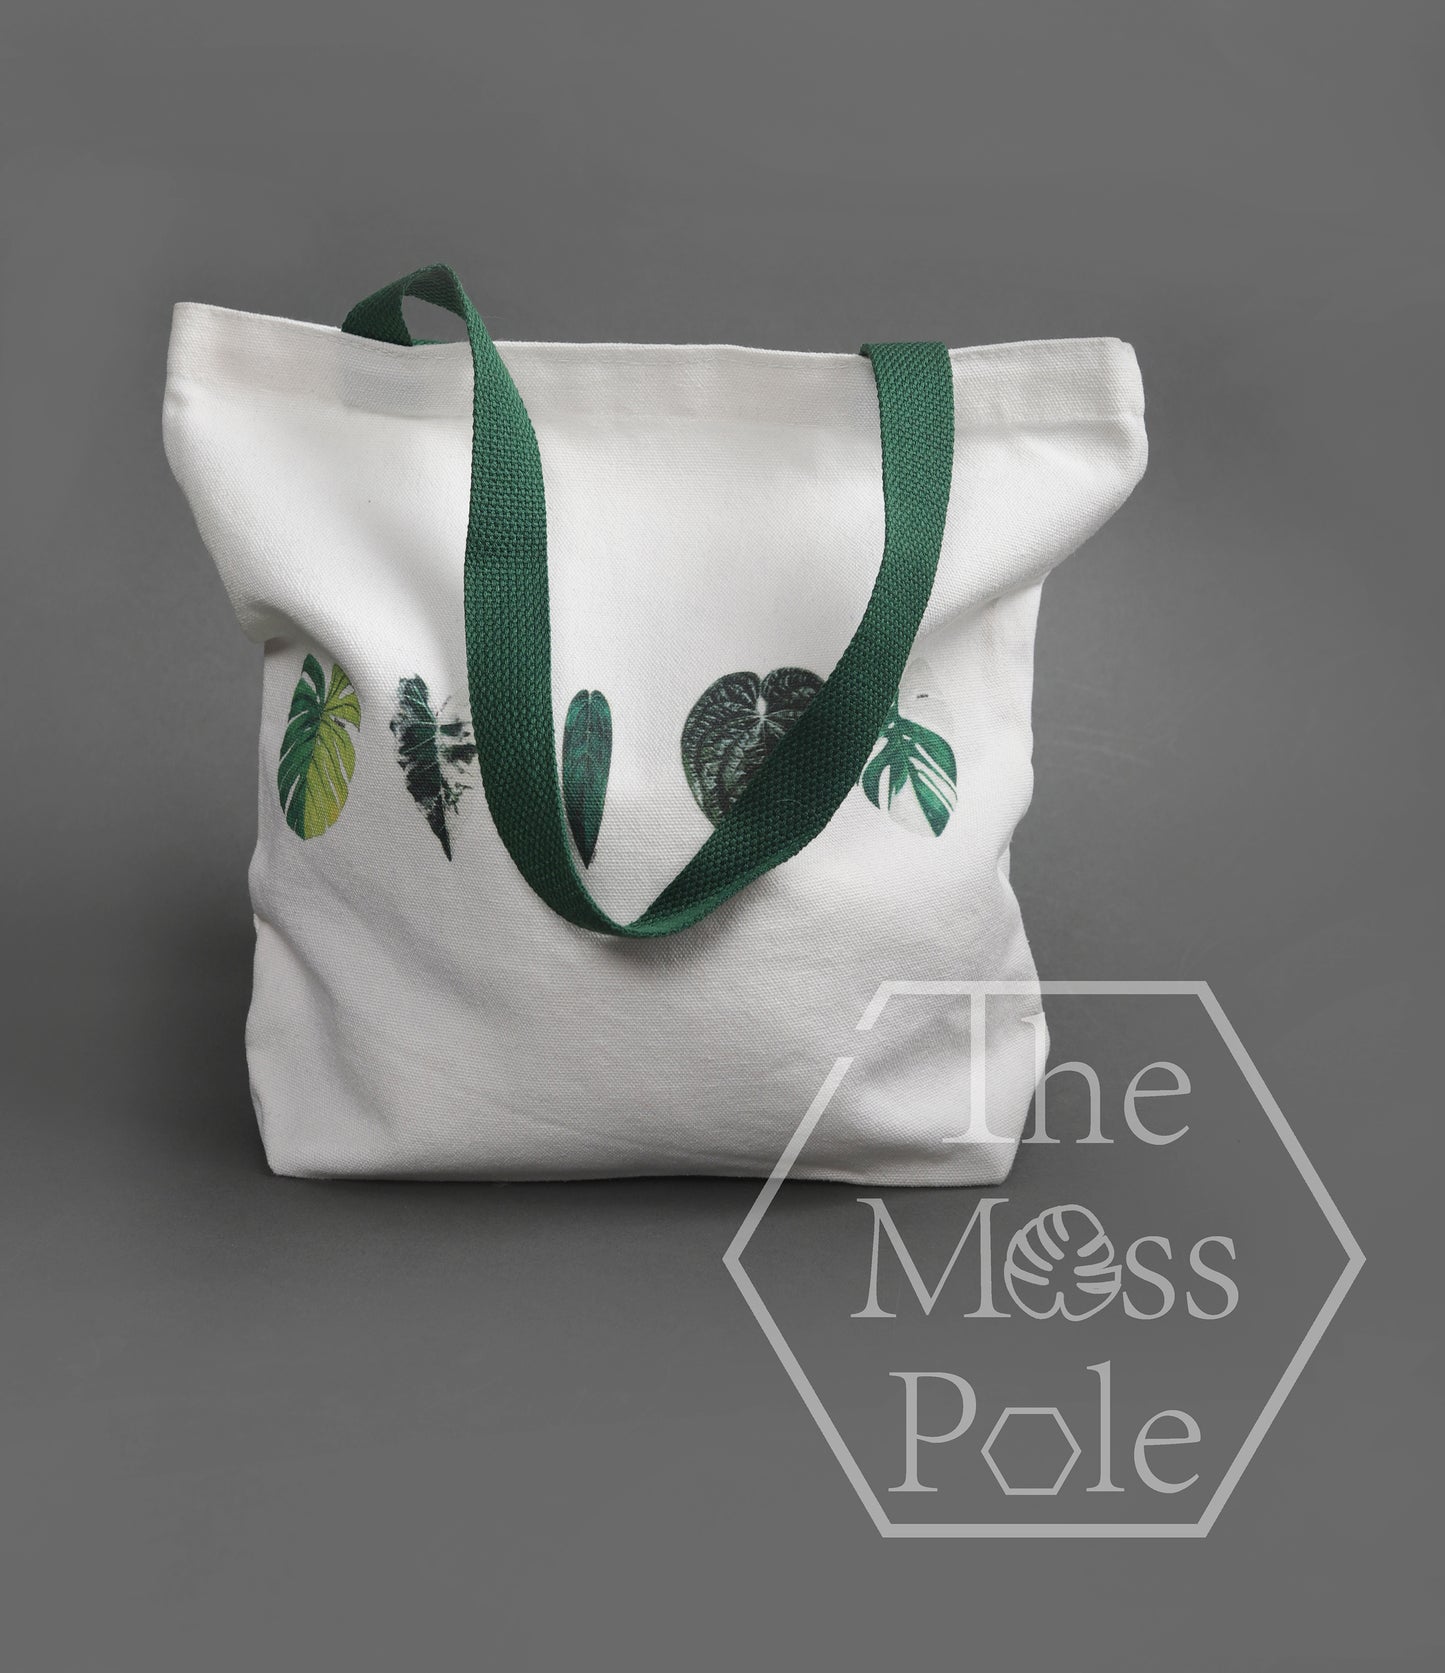 Stylish Aroid Tote Bag for Plant Enthusiasts - Eco-Friendly Canvas Bag with Monstera Leaf Print